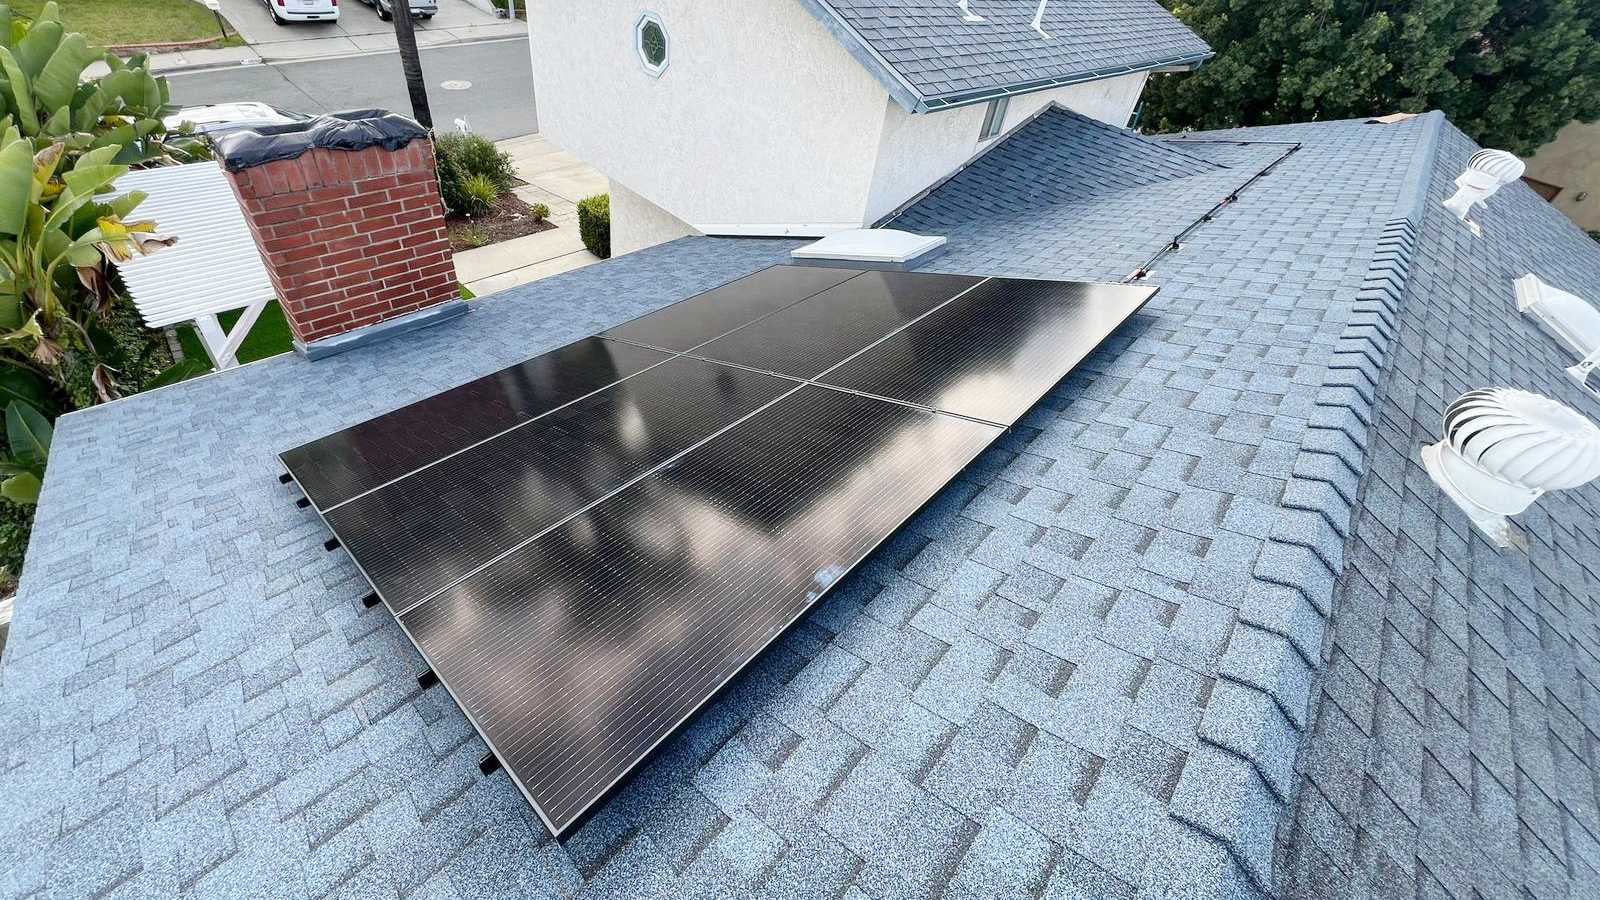 Solar Expert Installation And Support